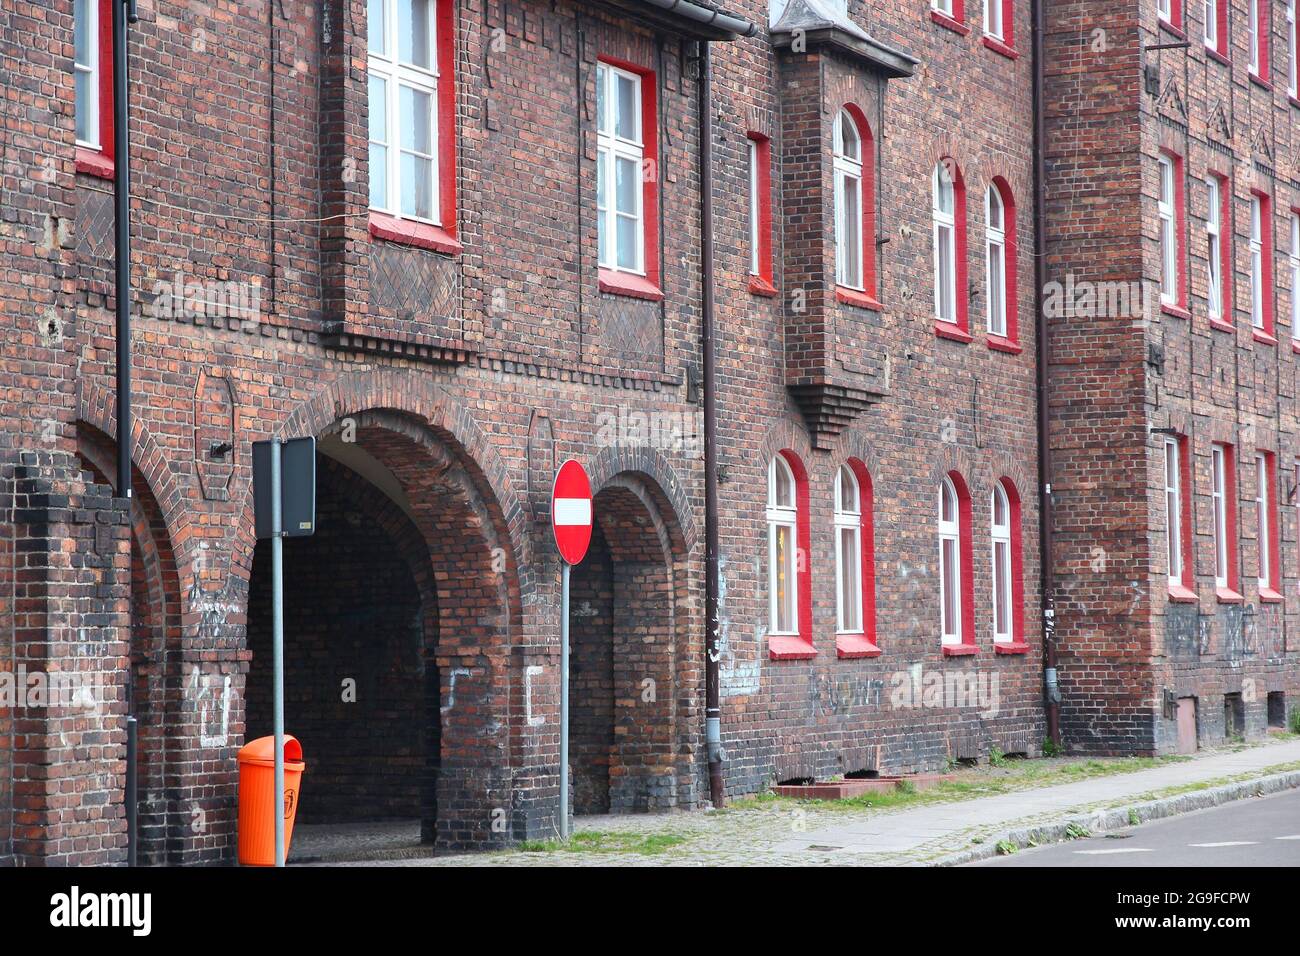 Katowice city in Silesia region in Poland. Old brick architecture in Nikiszowiec historical district. Stock Photo